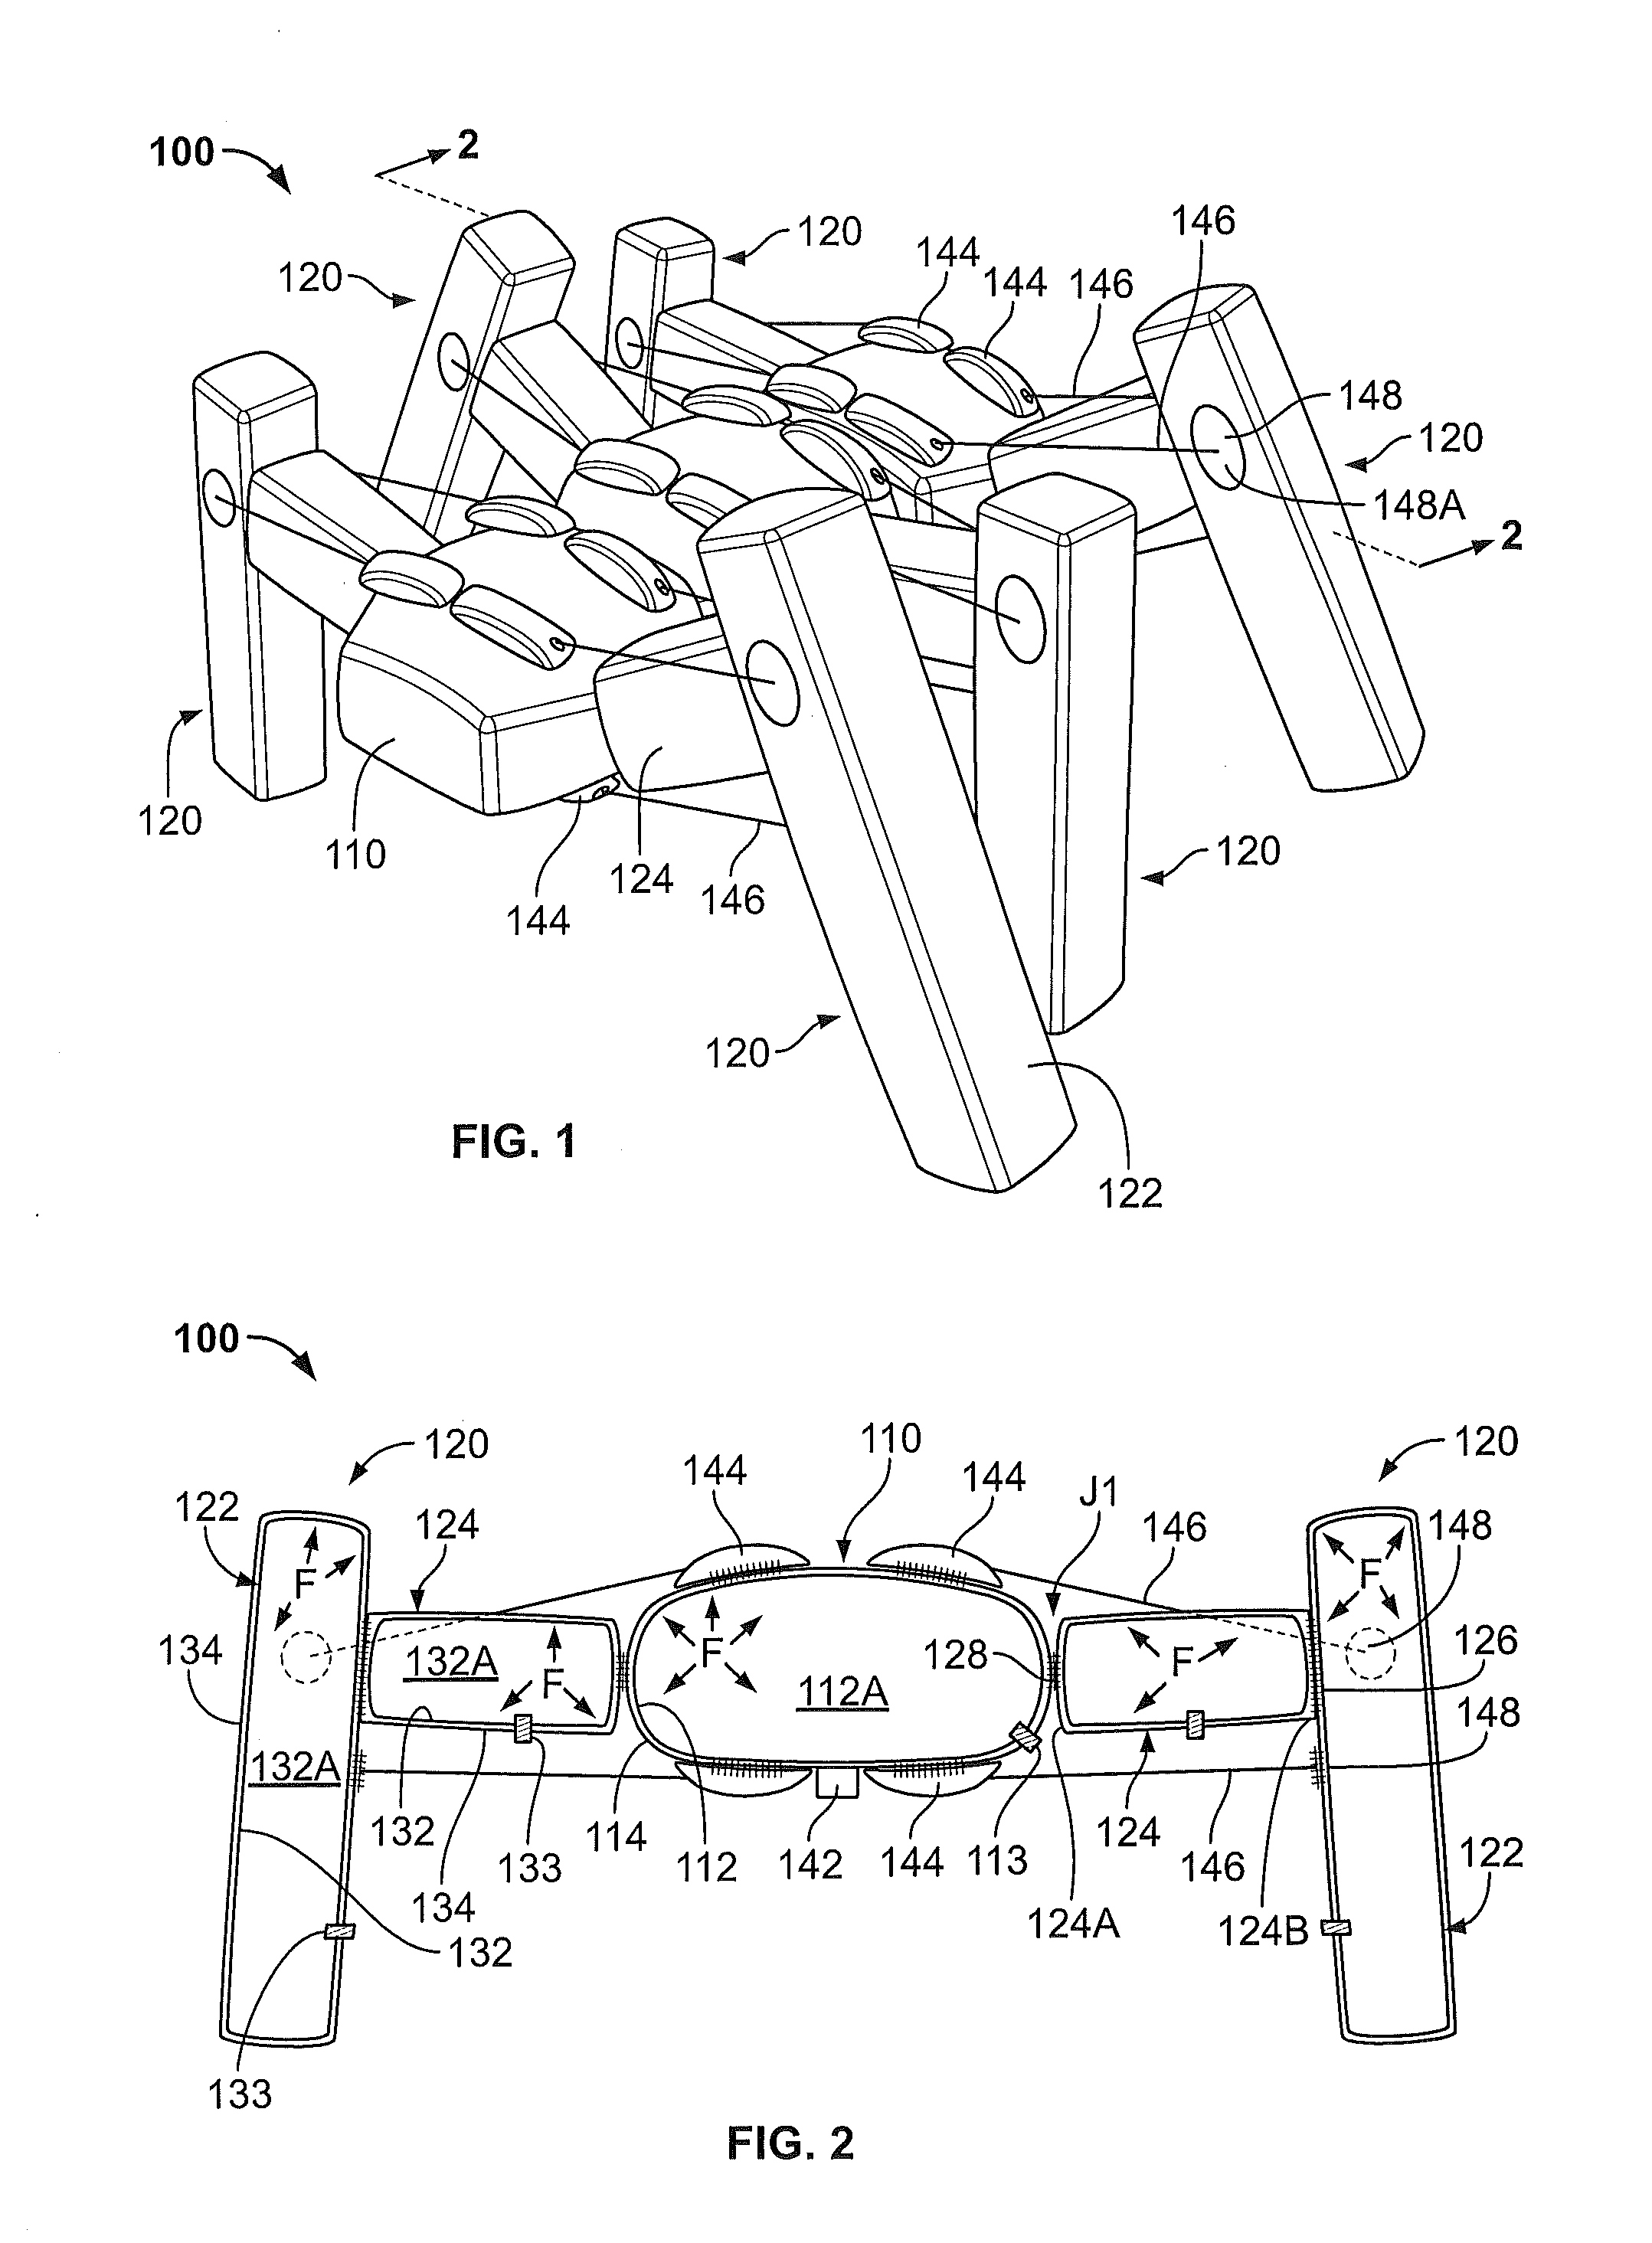 Inflatable robots, robotic components and assemblies and methods including same